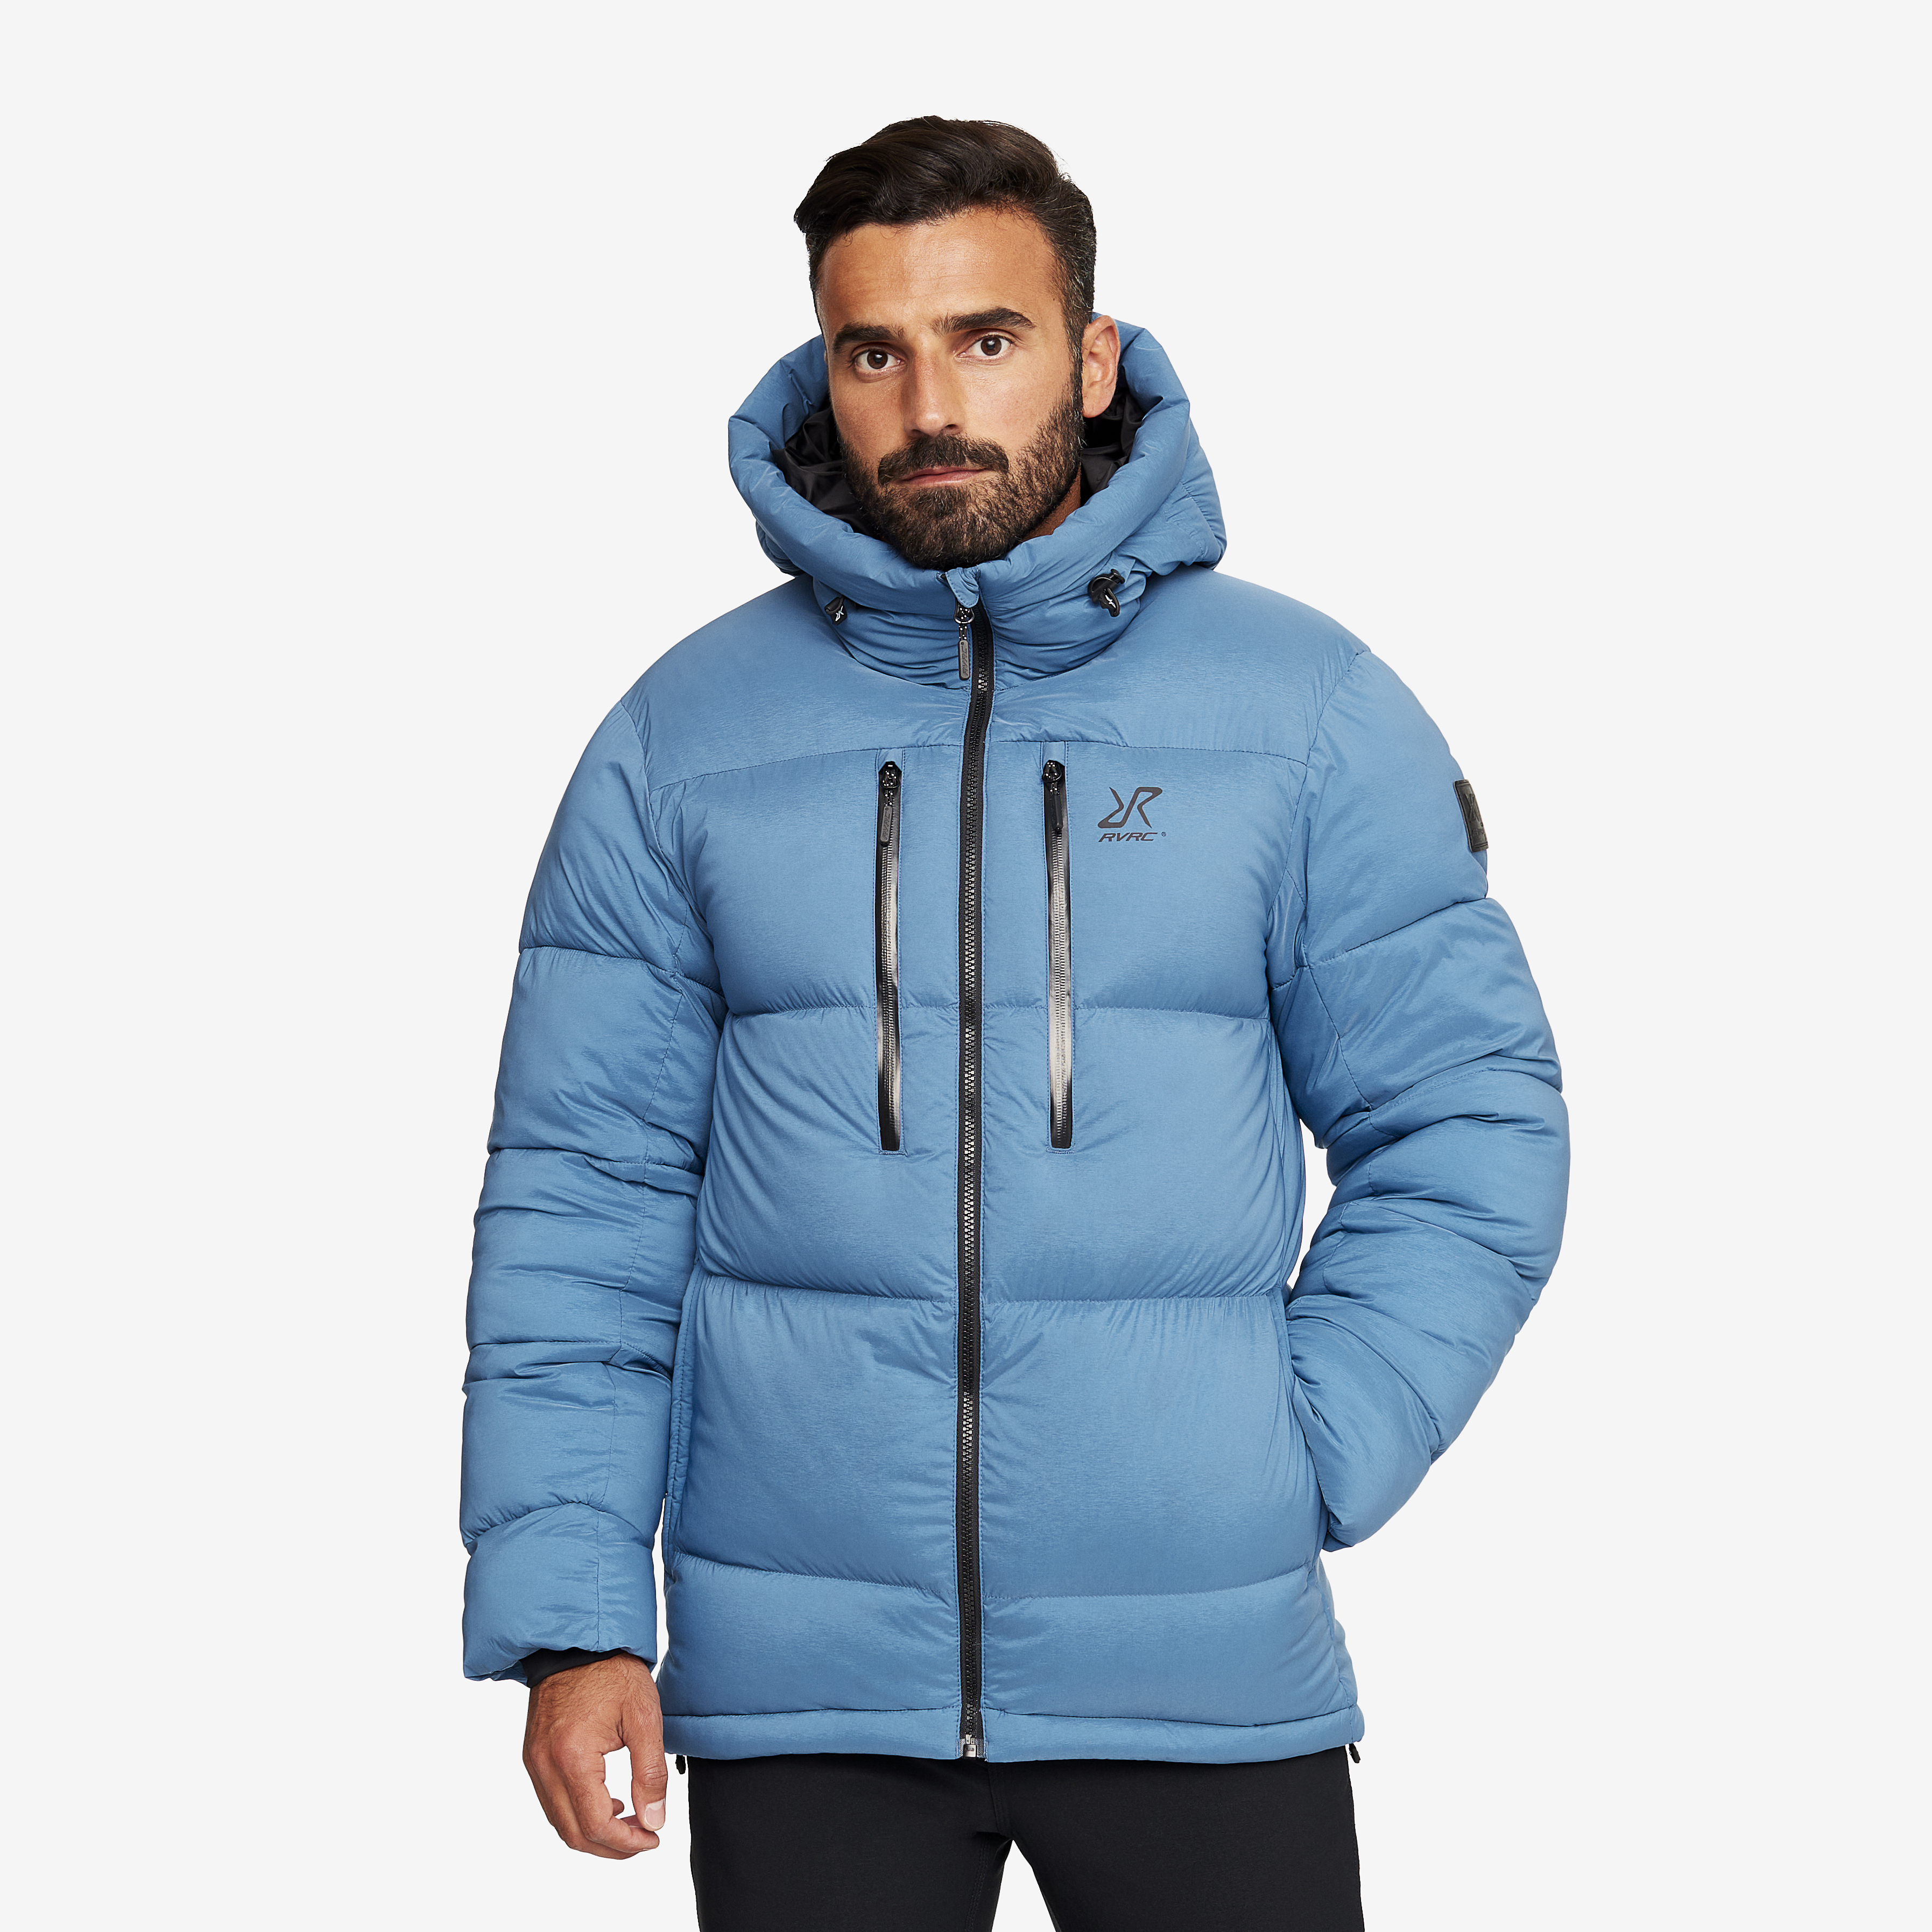 Flexpedition Jacket Pacific Blue Herre